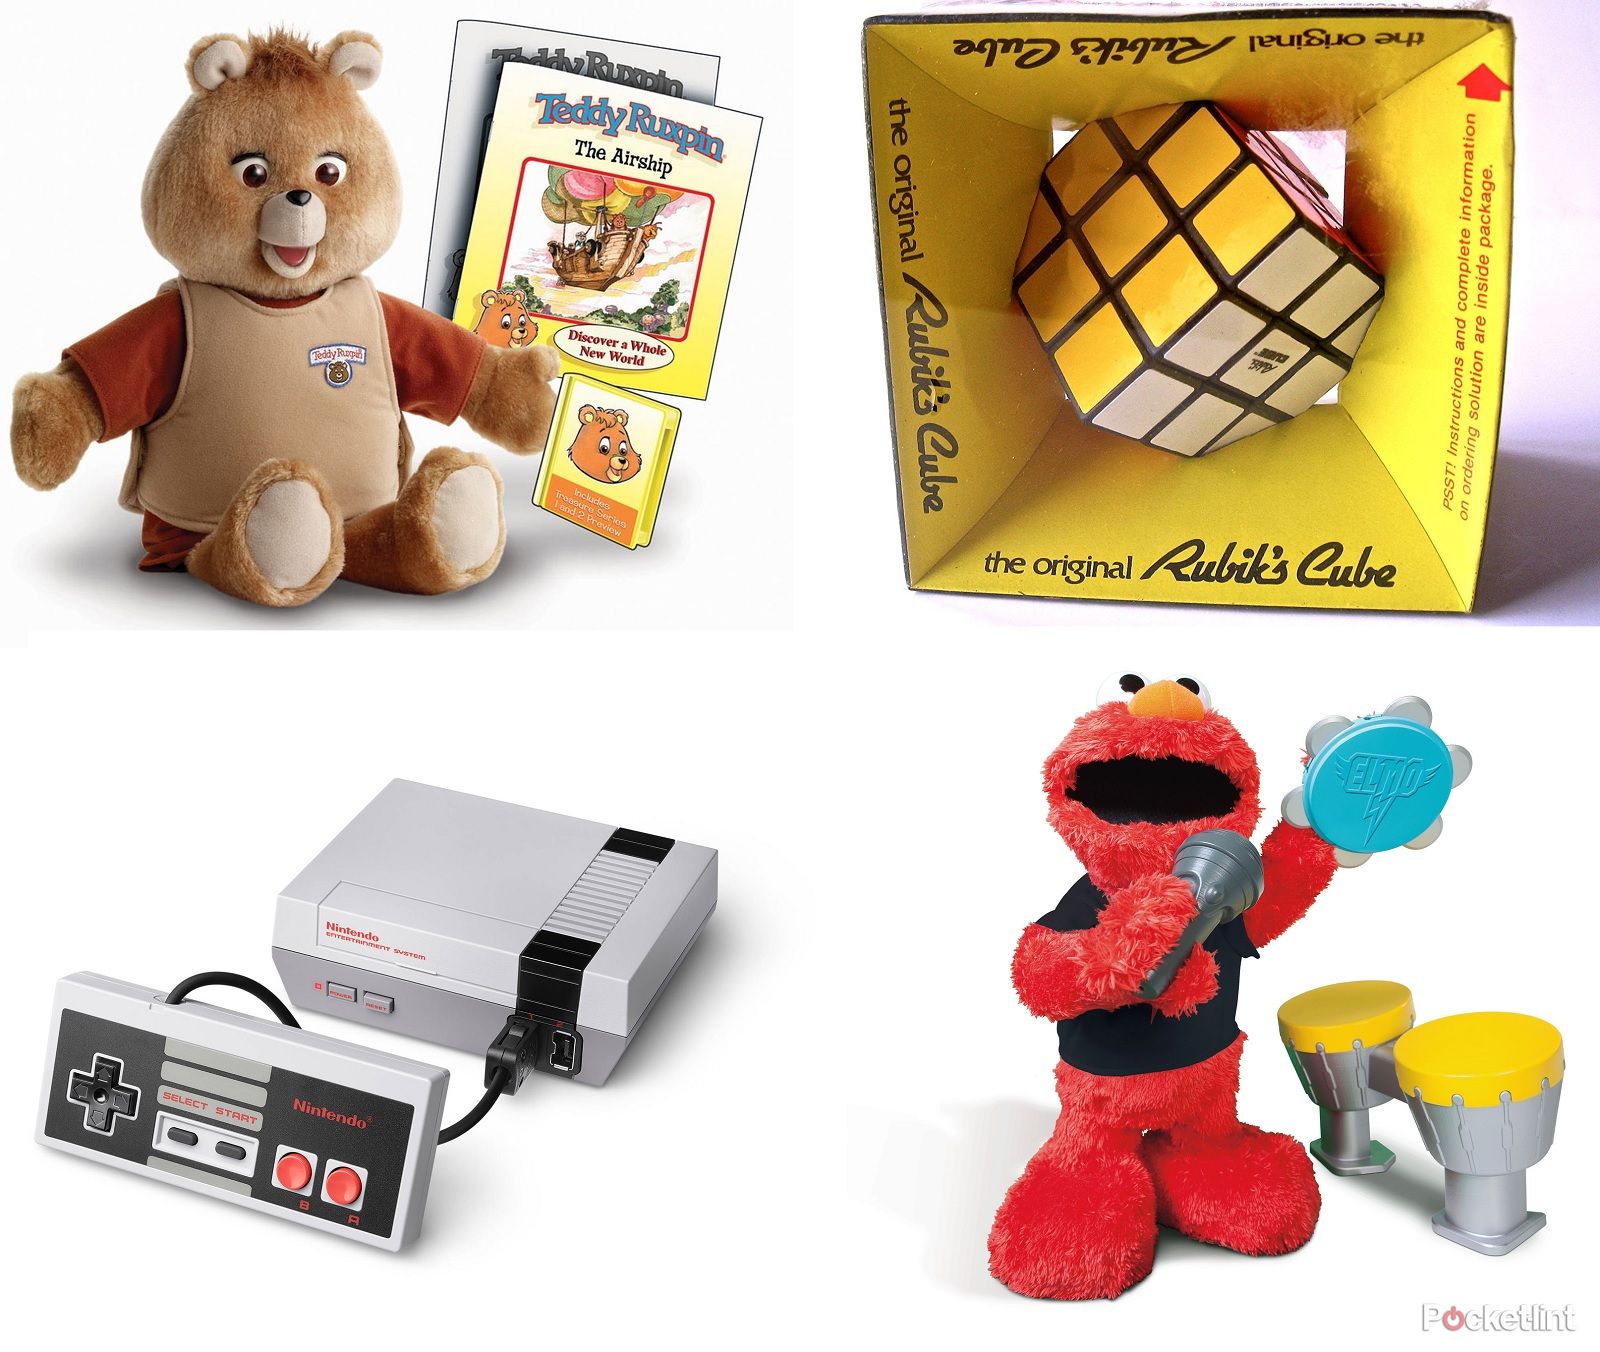 These are the best-selling Christmas toys from the 80s and 90s